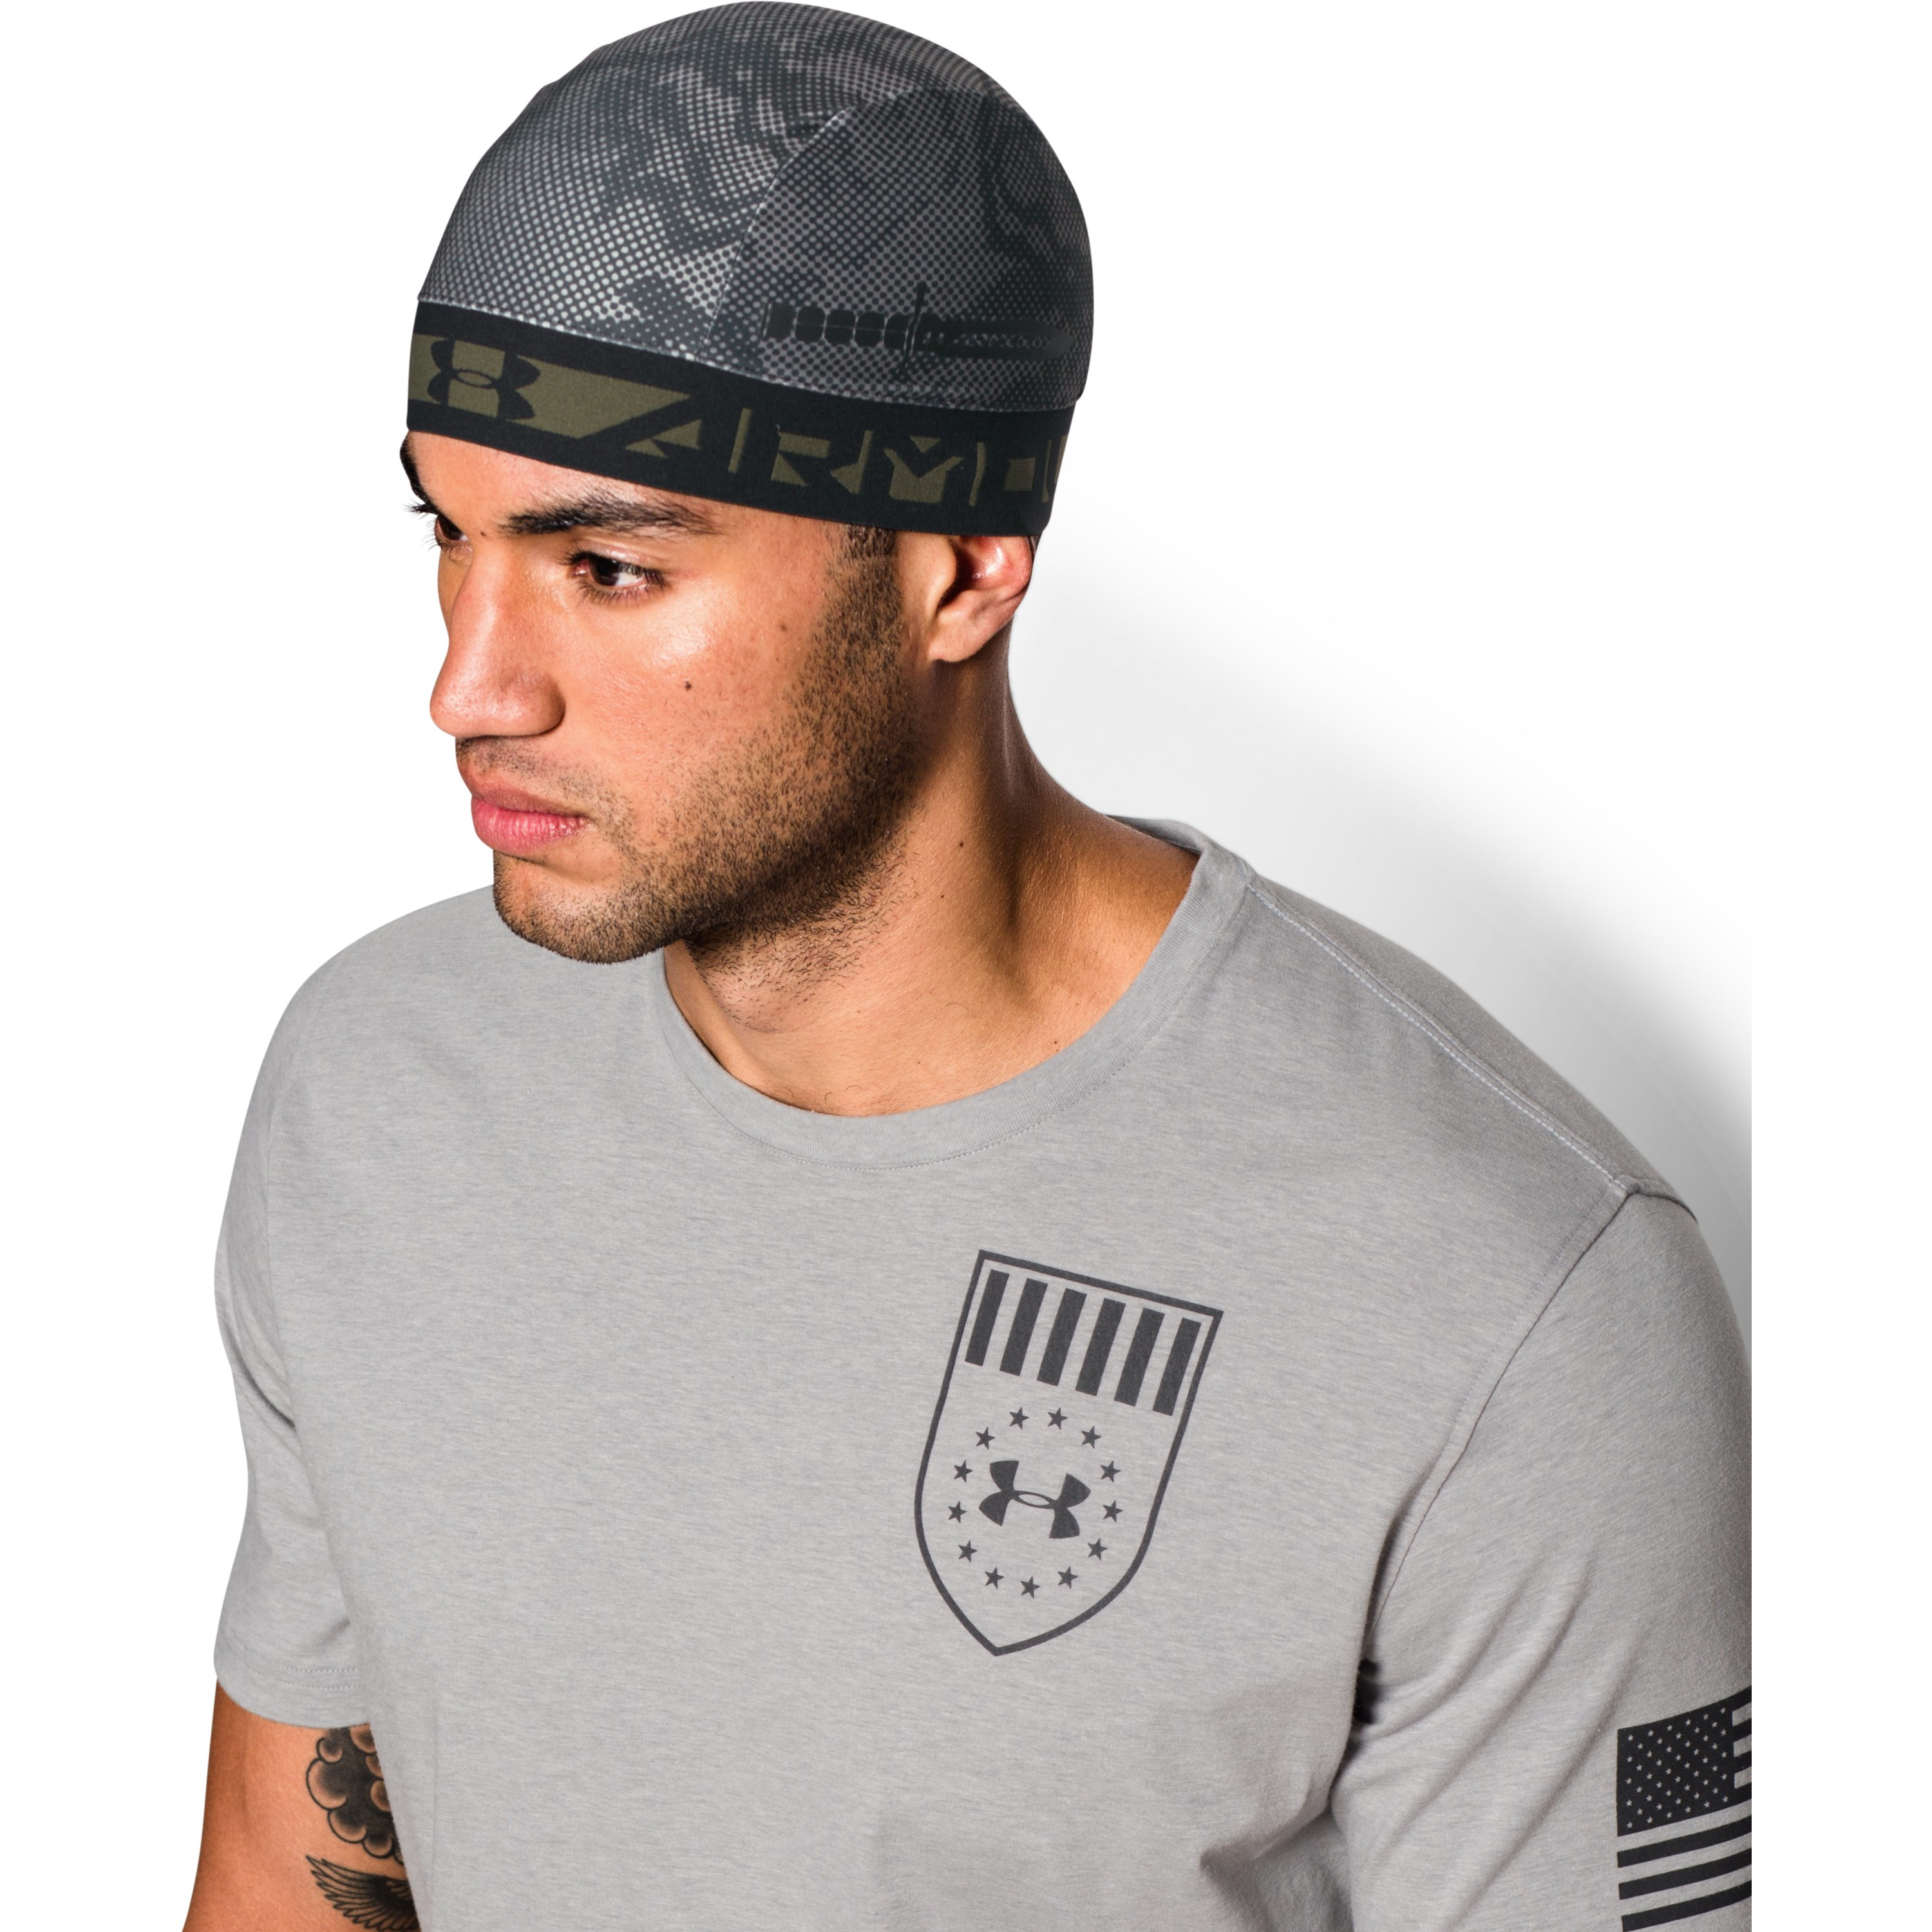 Cheap >under armour skull caps for men big sale - OFF 61%